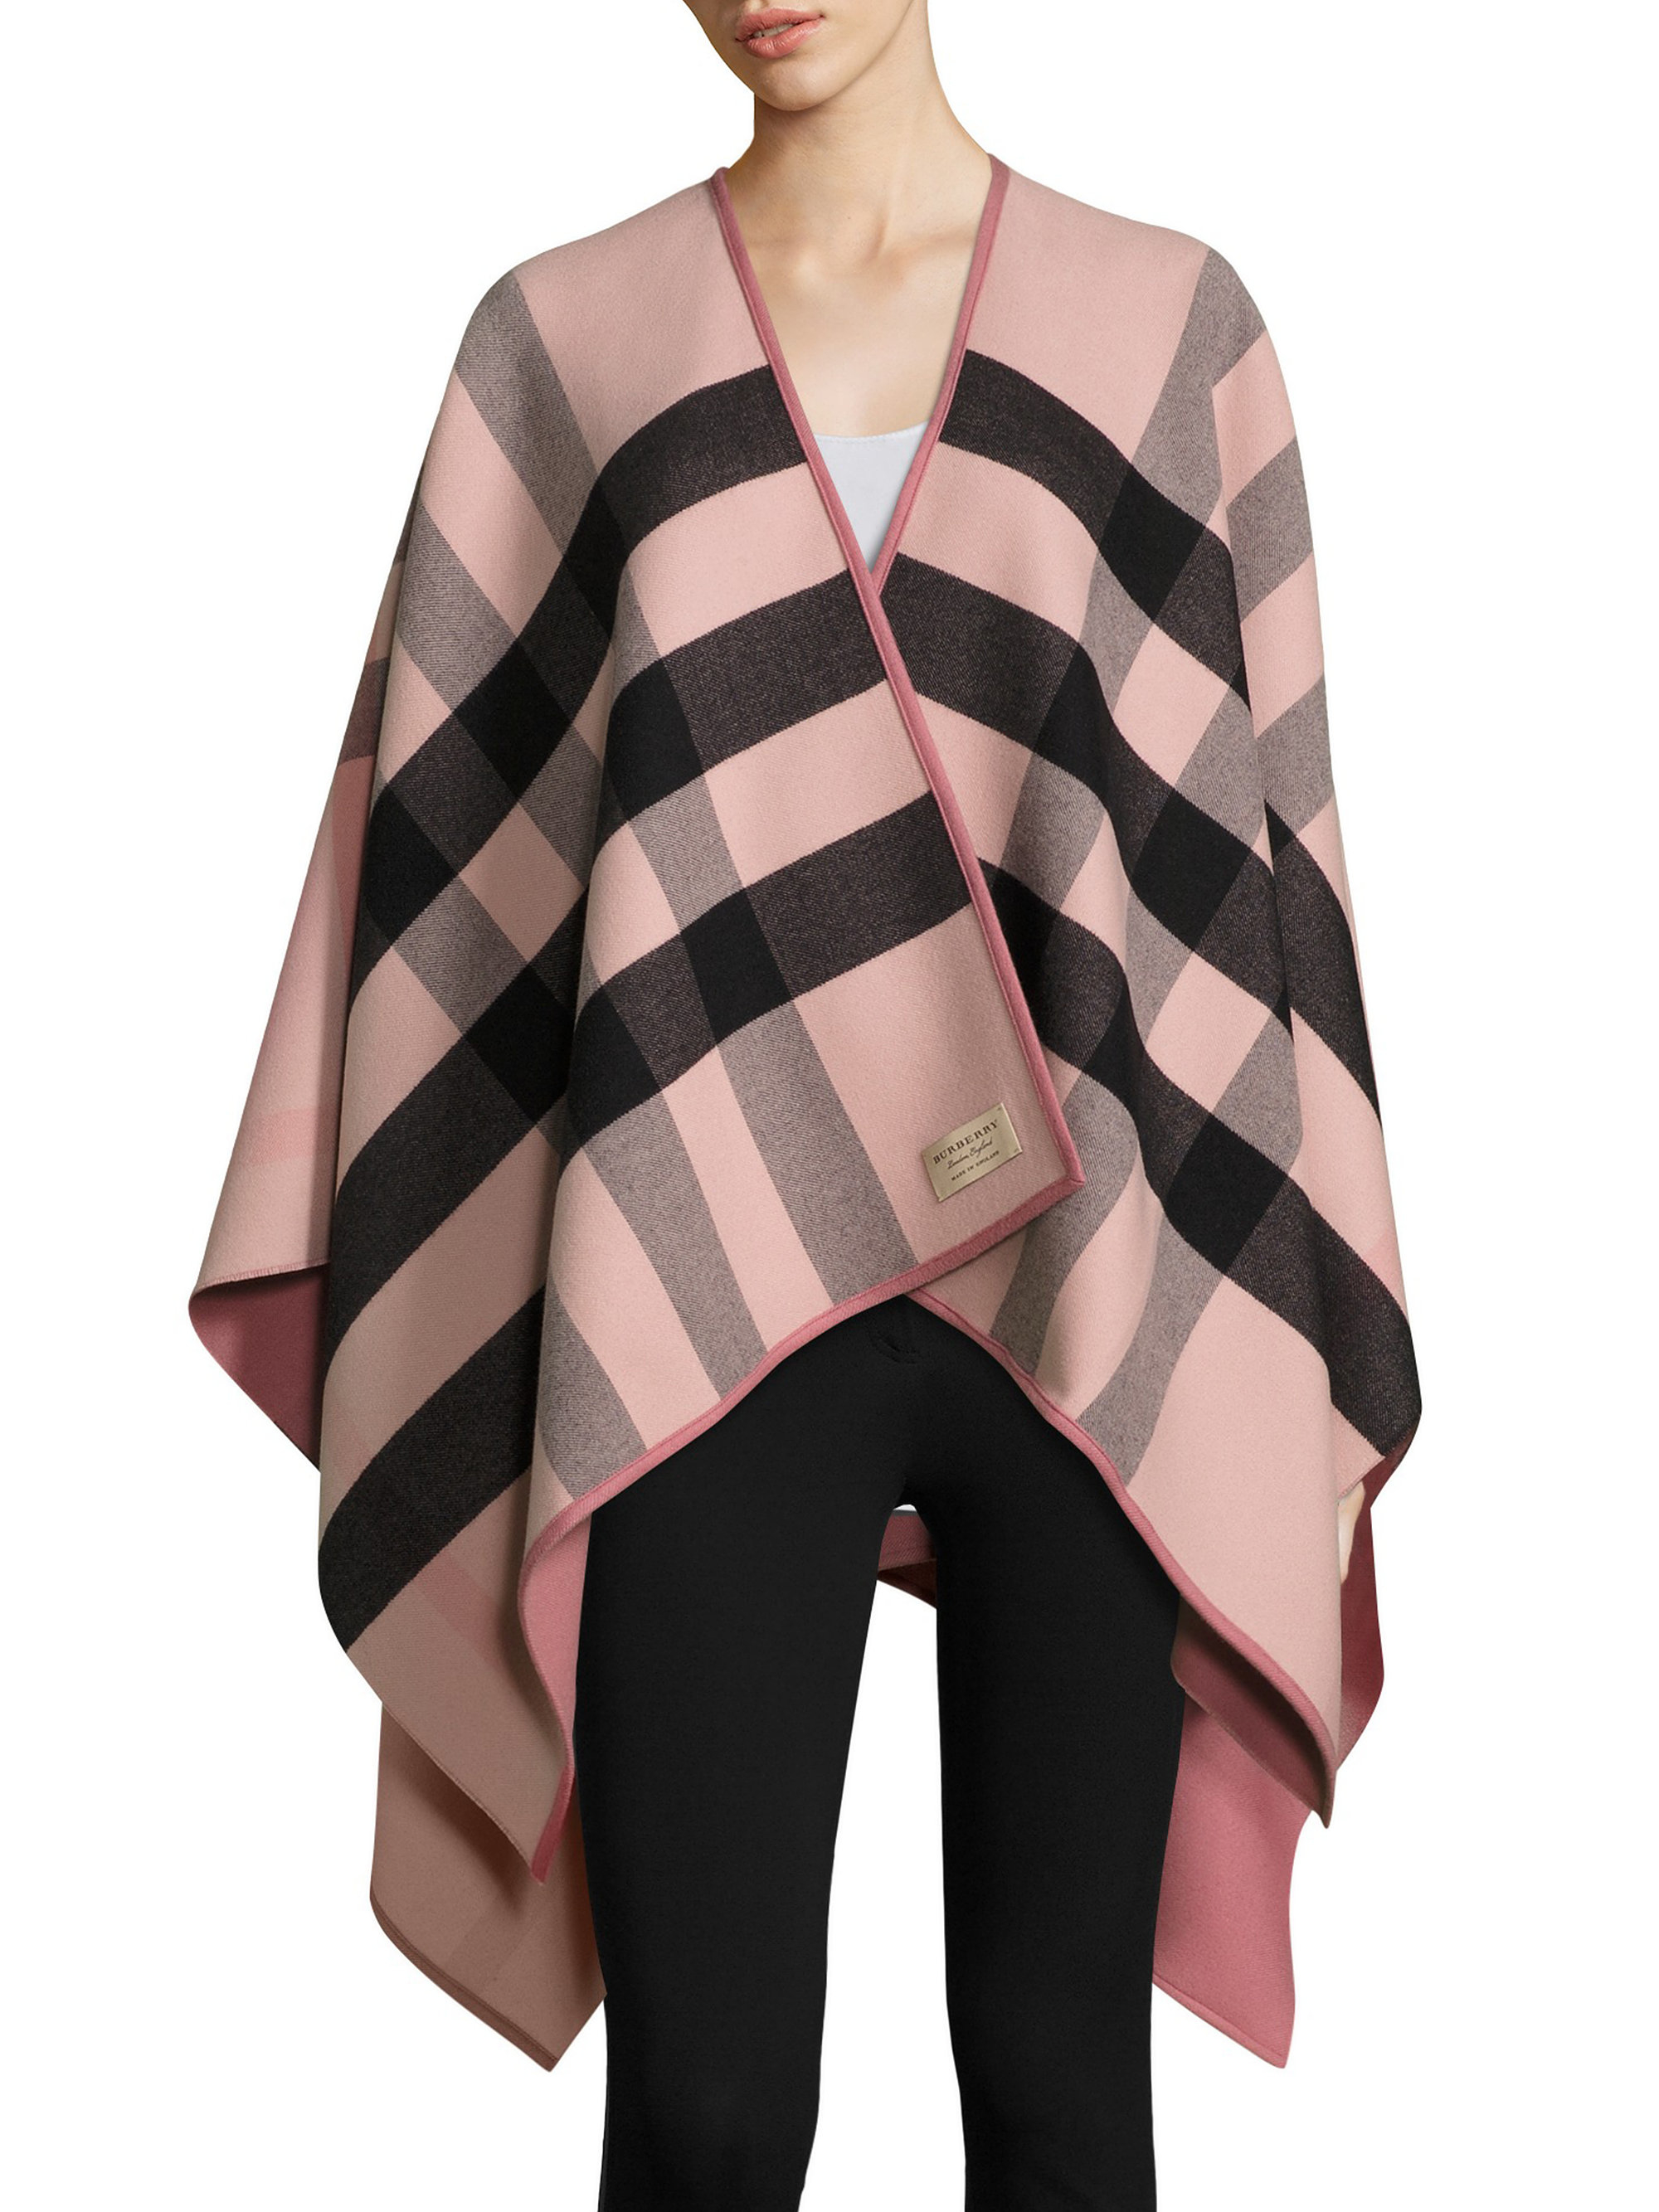 Burberry Charlotte Reversible Check Wool Cape in Ash Rose (Blue) - Lyst